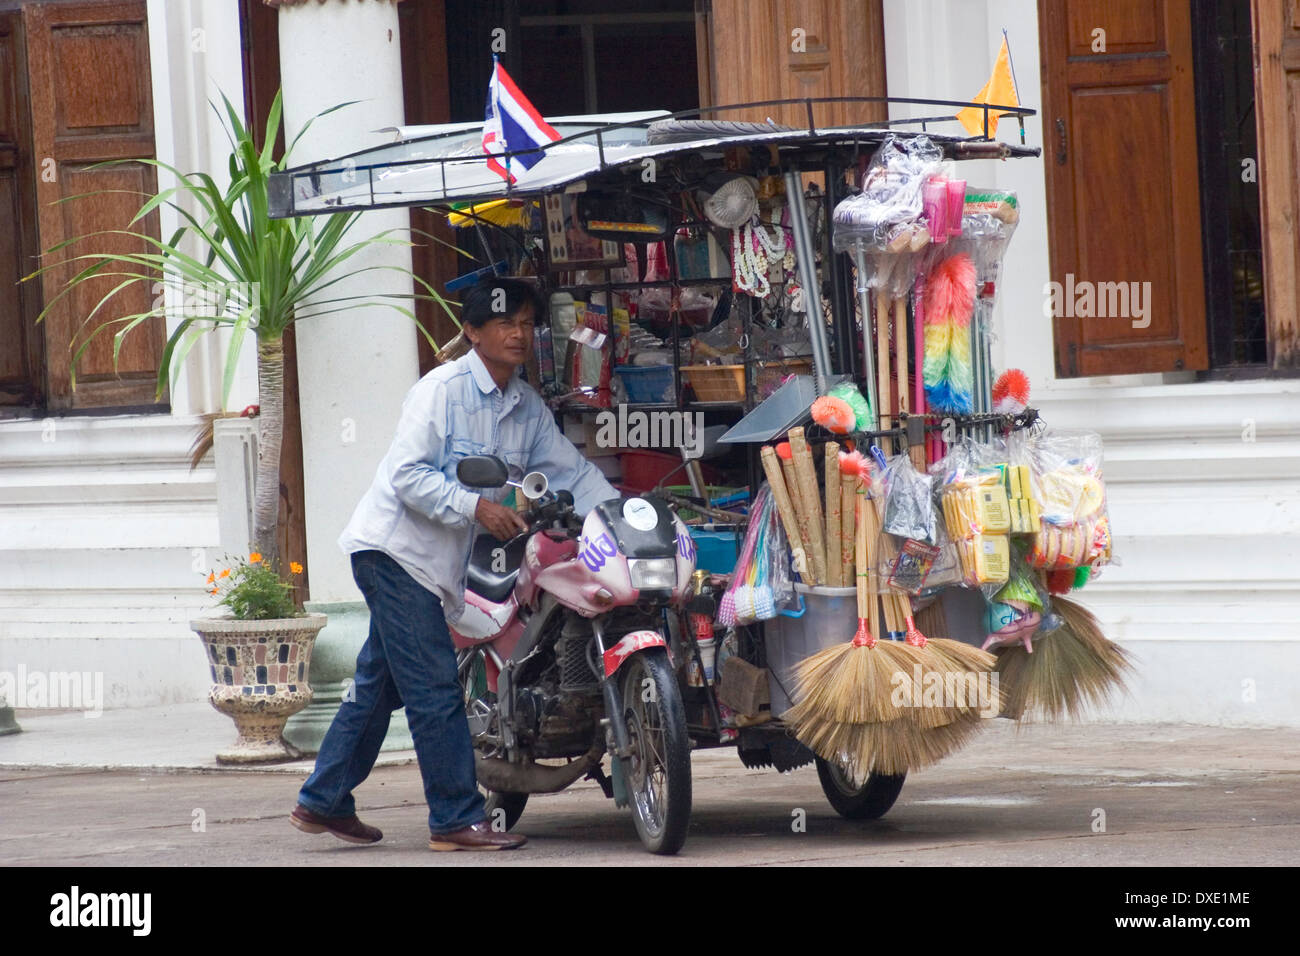 A man is pushing a motorcycle with a sidecar filled with household supplies on a city street in Khorat, Thailand. Stock Photo